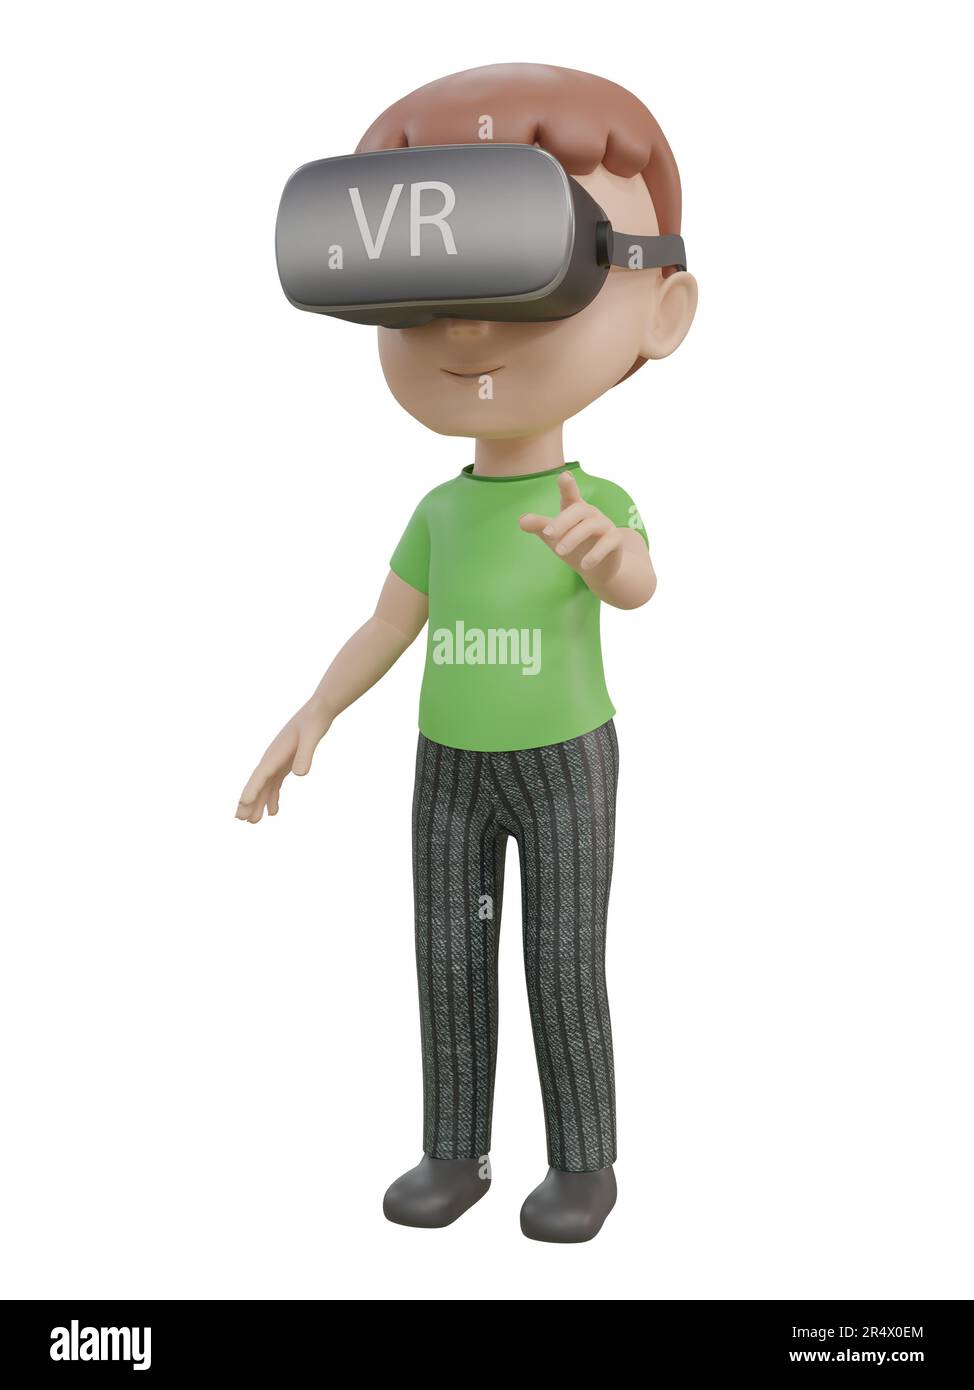 3D rendered image of a cartoon boy wearing Virtual reality headset in different angles Stock Photo